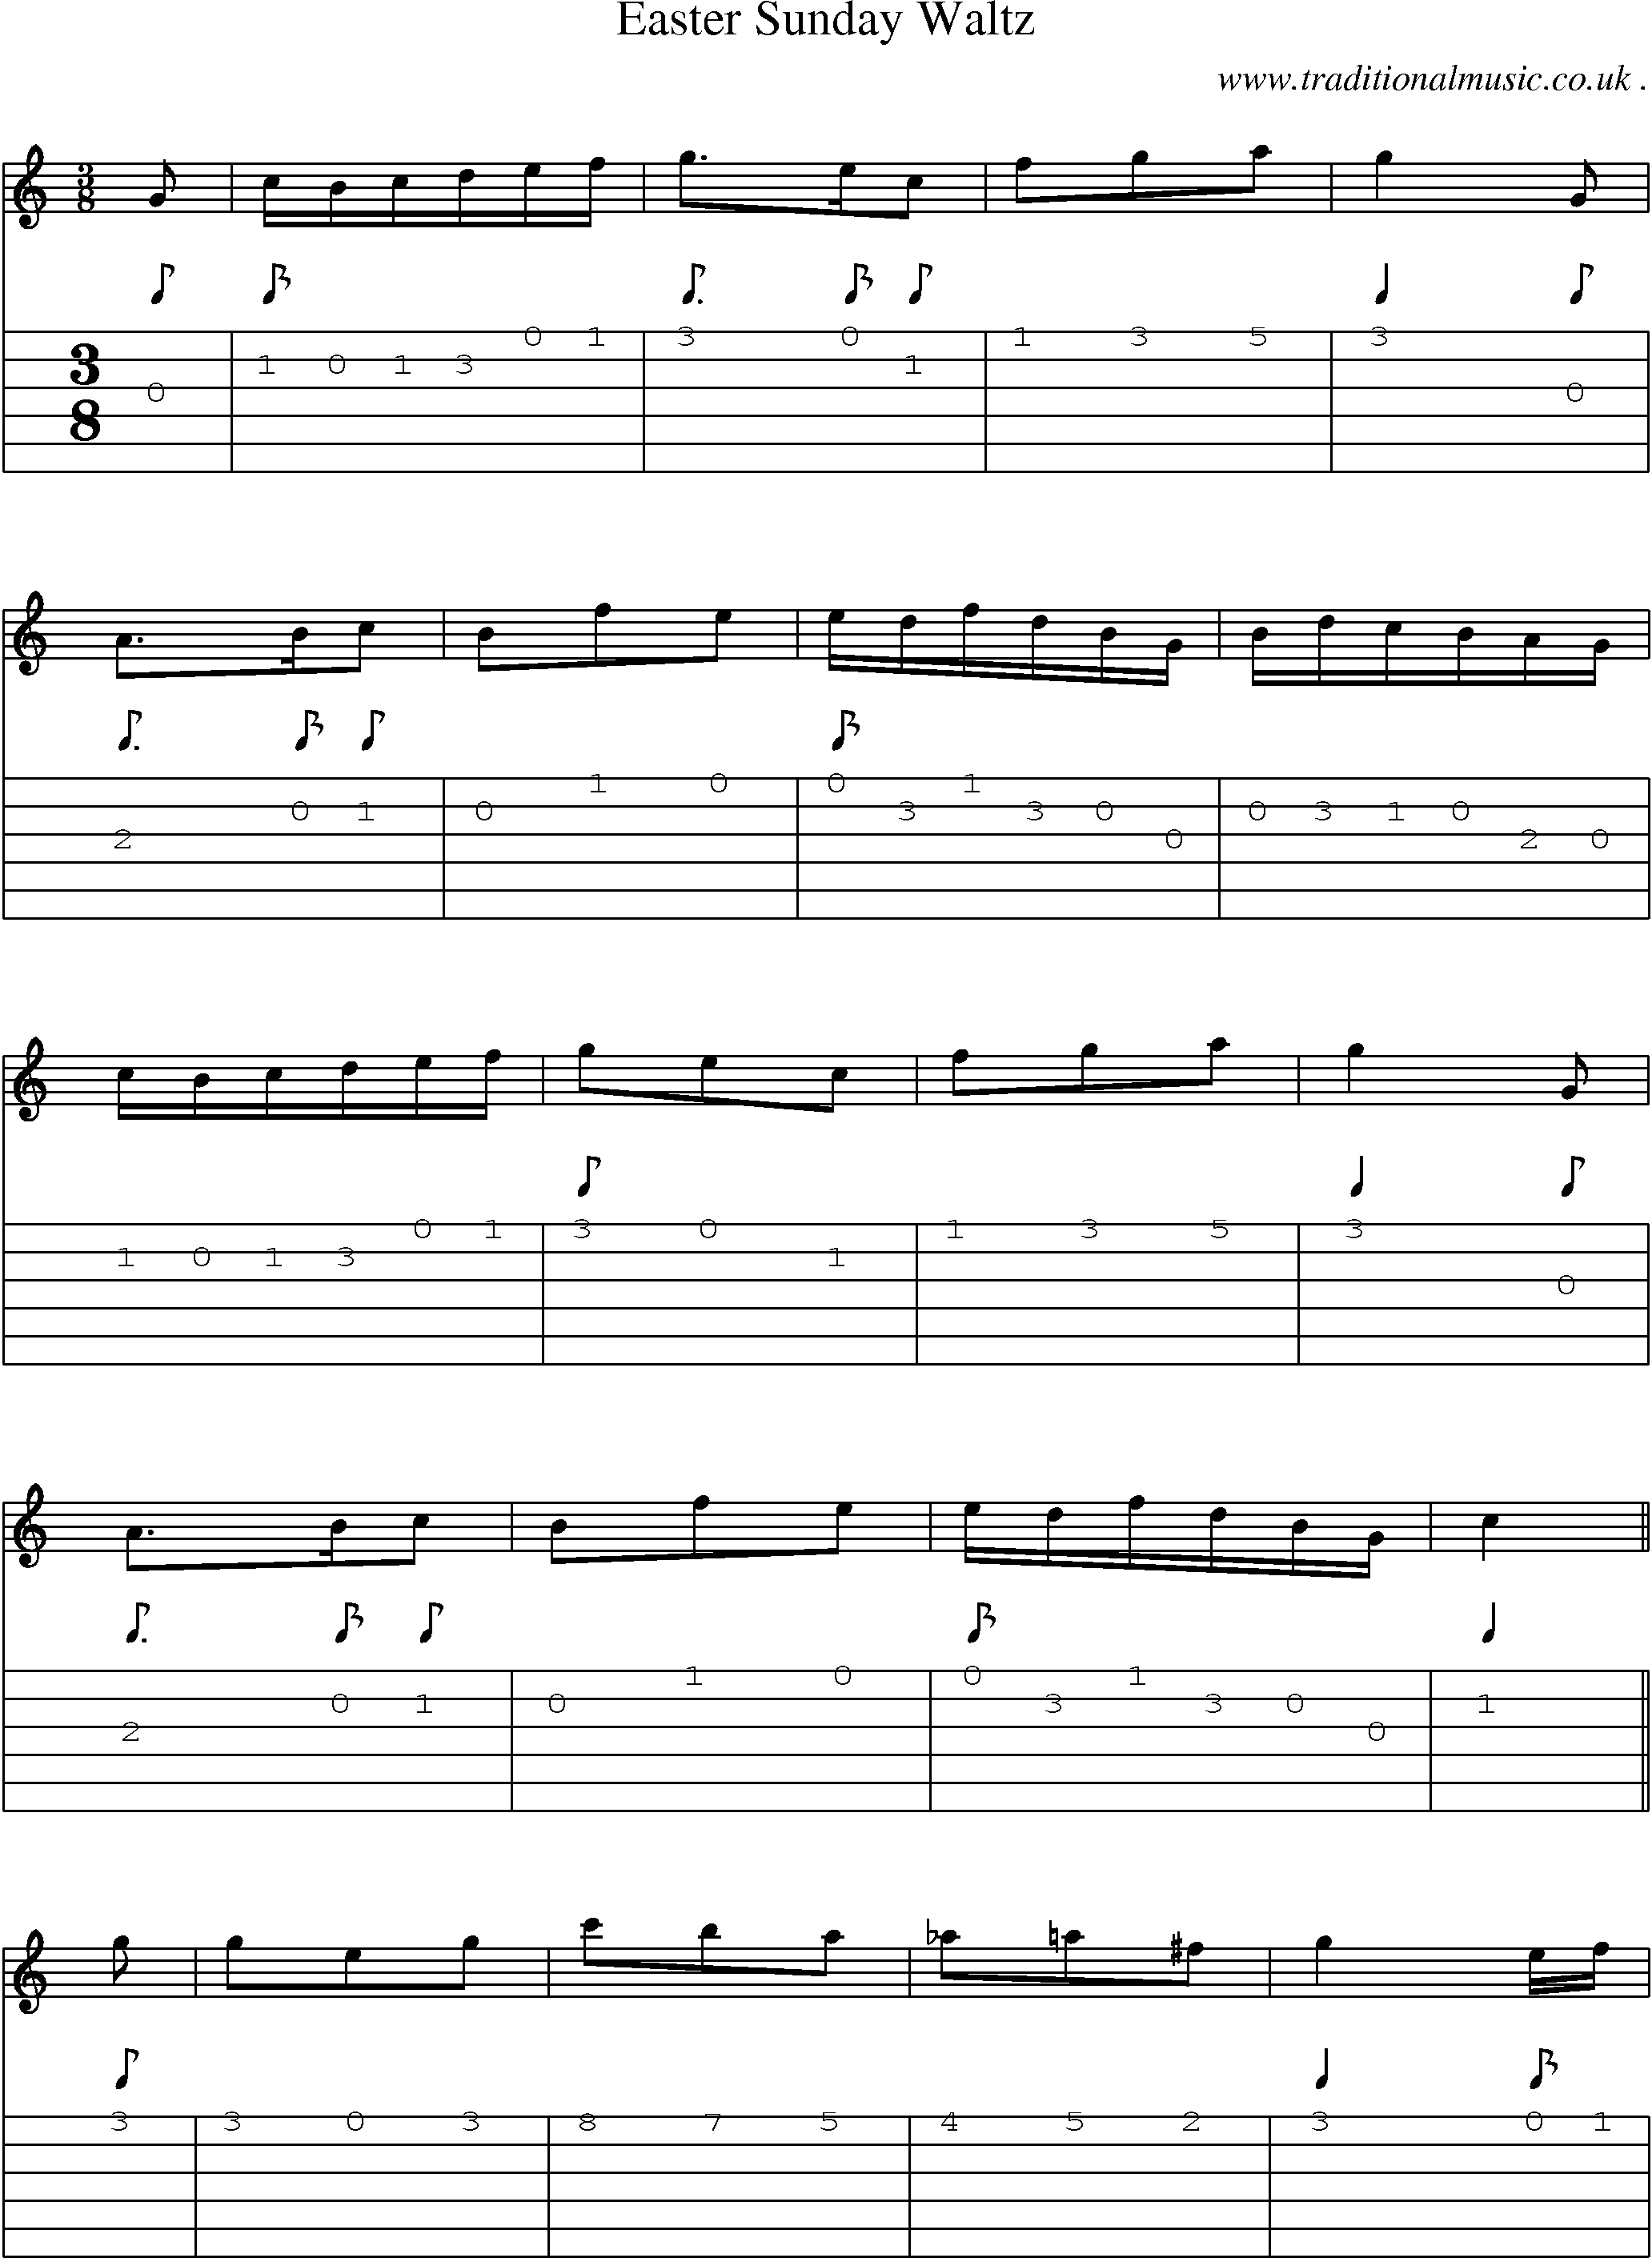 Sheet-Music and Guitar Tabs for Easter Sunday Waltz